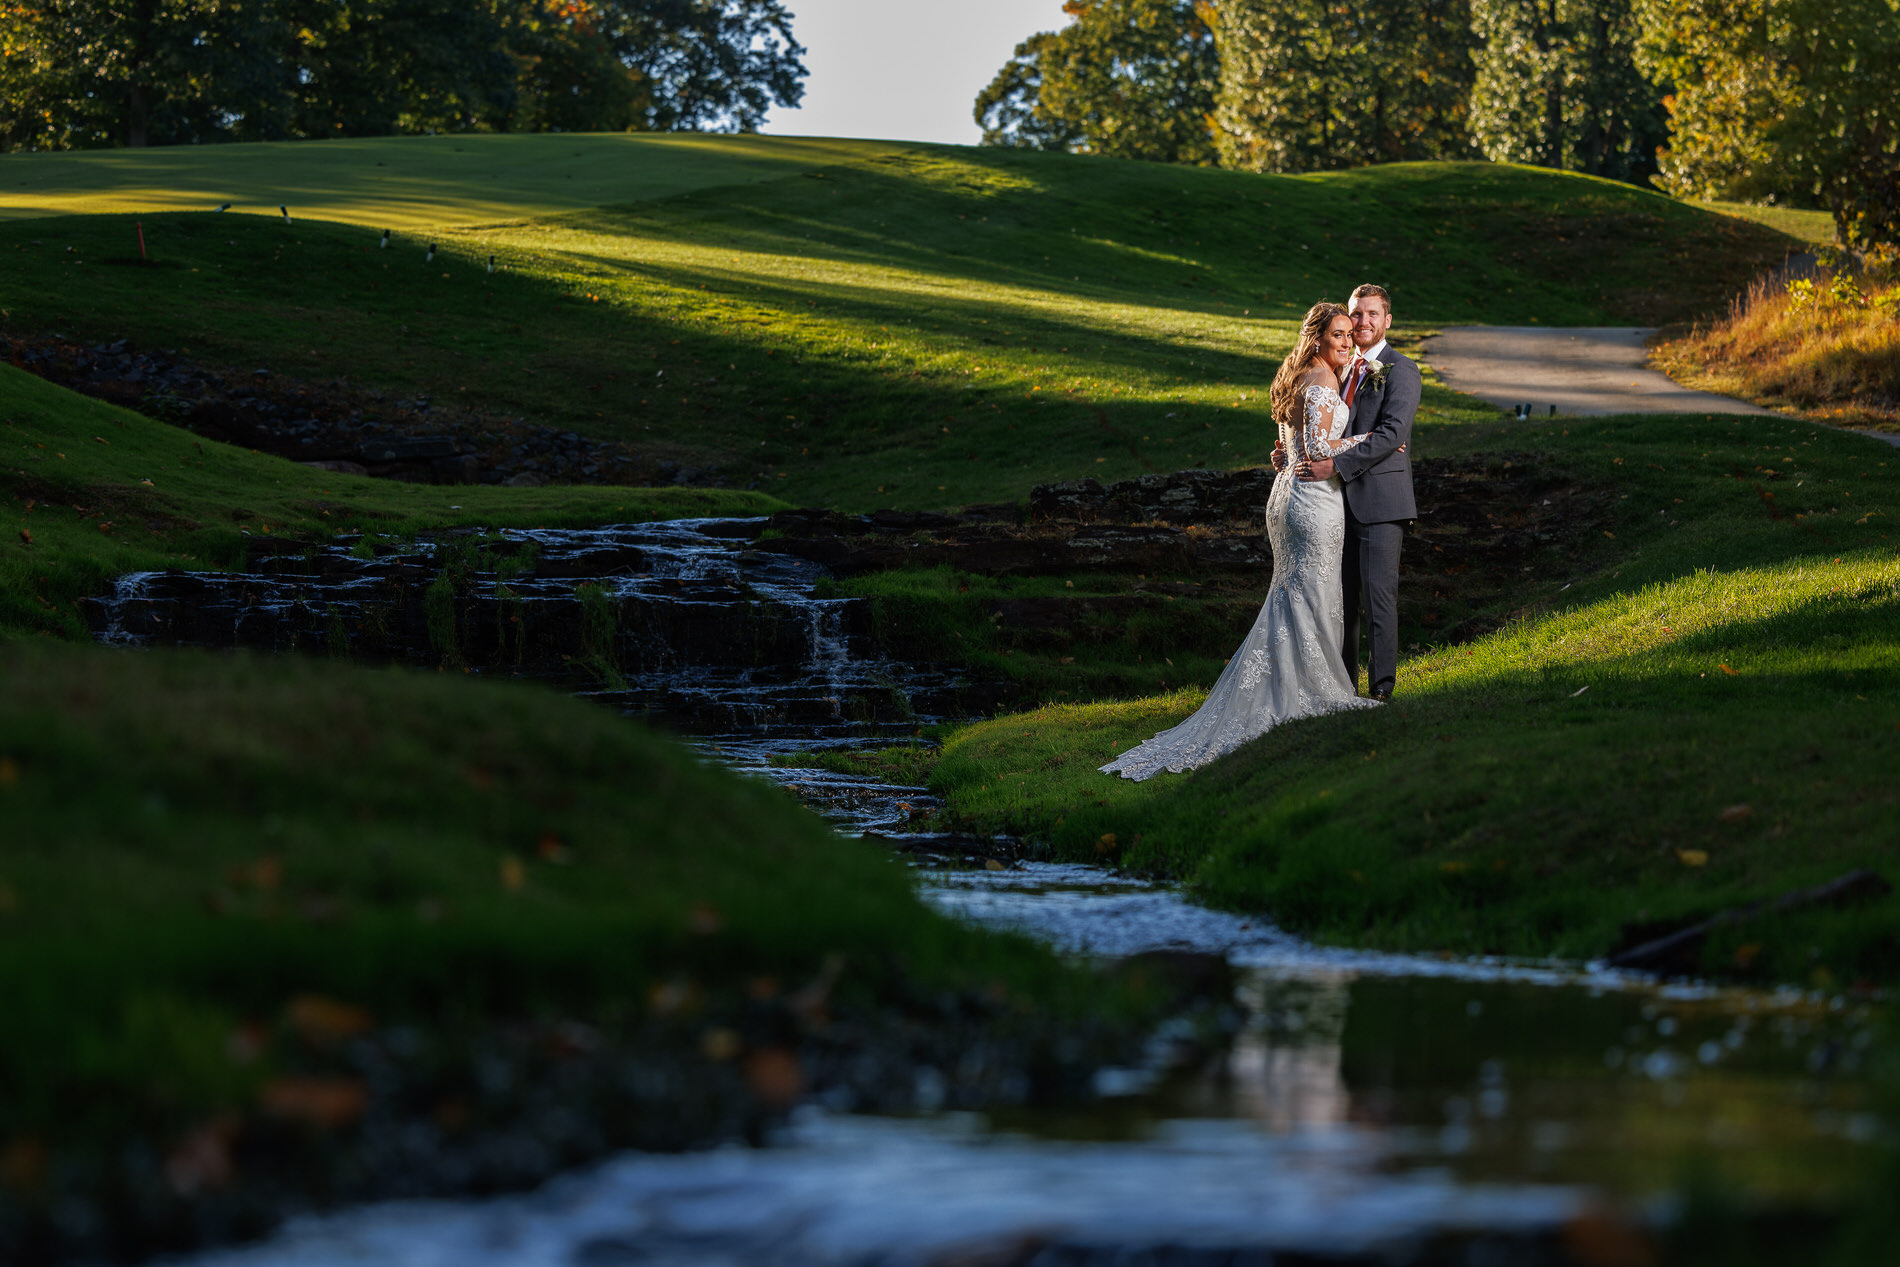 A newlywed couple embraces beside a small stream with a cascading waterfall in a lush, sunlit park in Western Massachusetts.